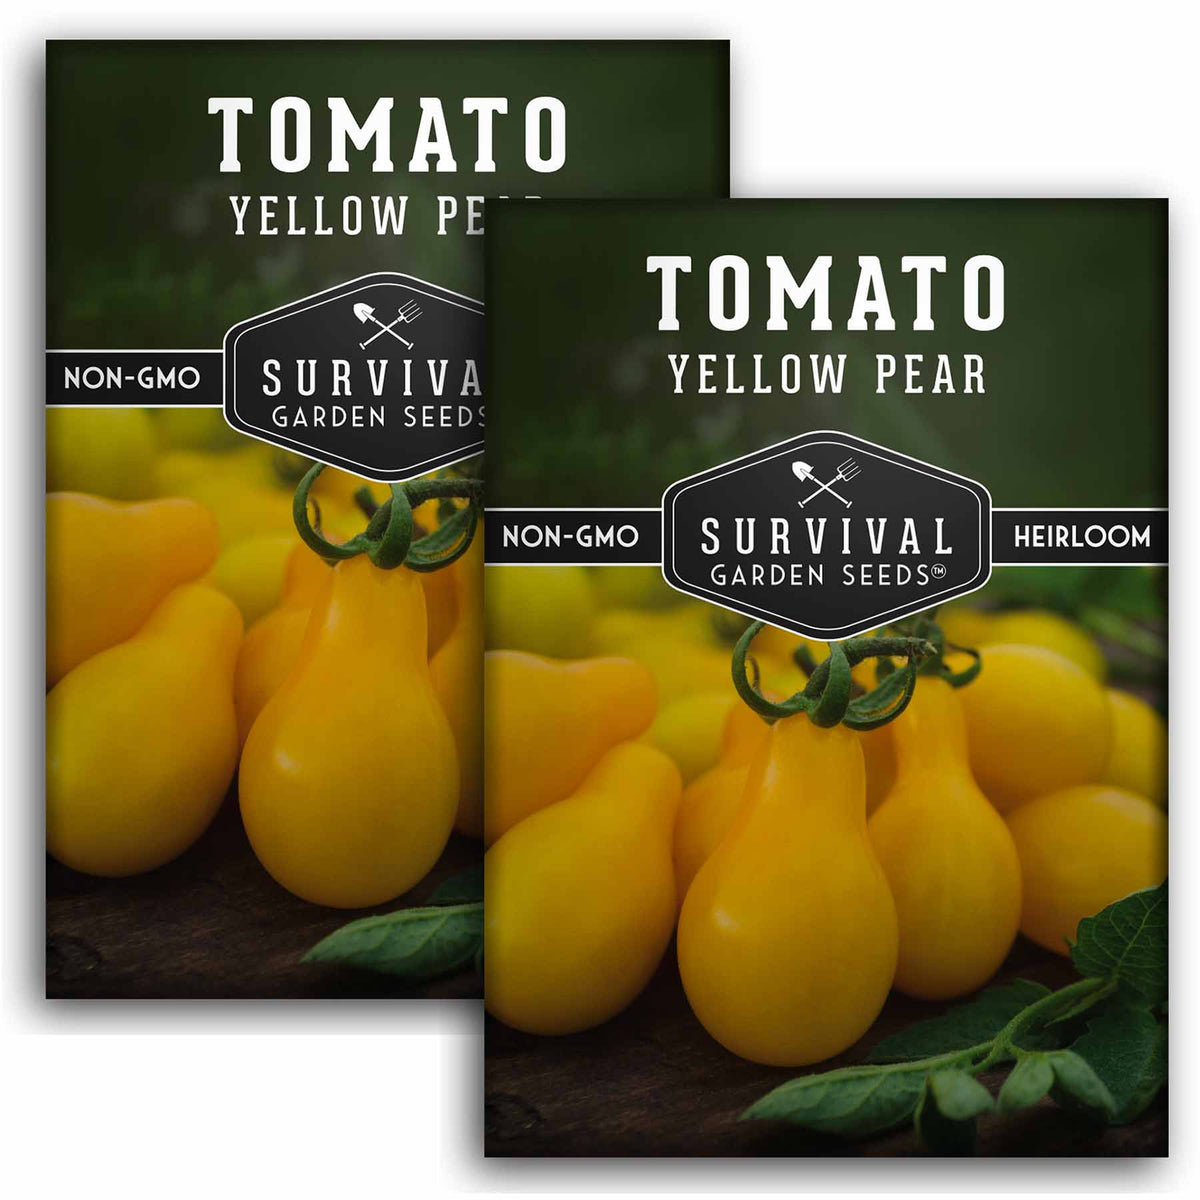 2 packets of Yellow Pear Tomato seeds